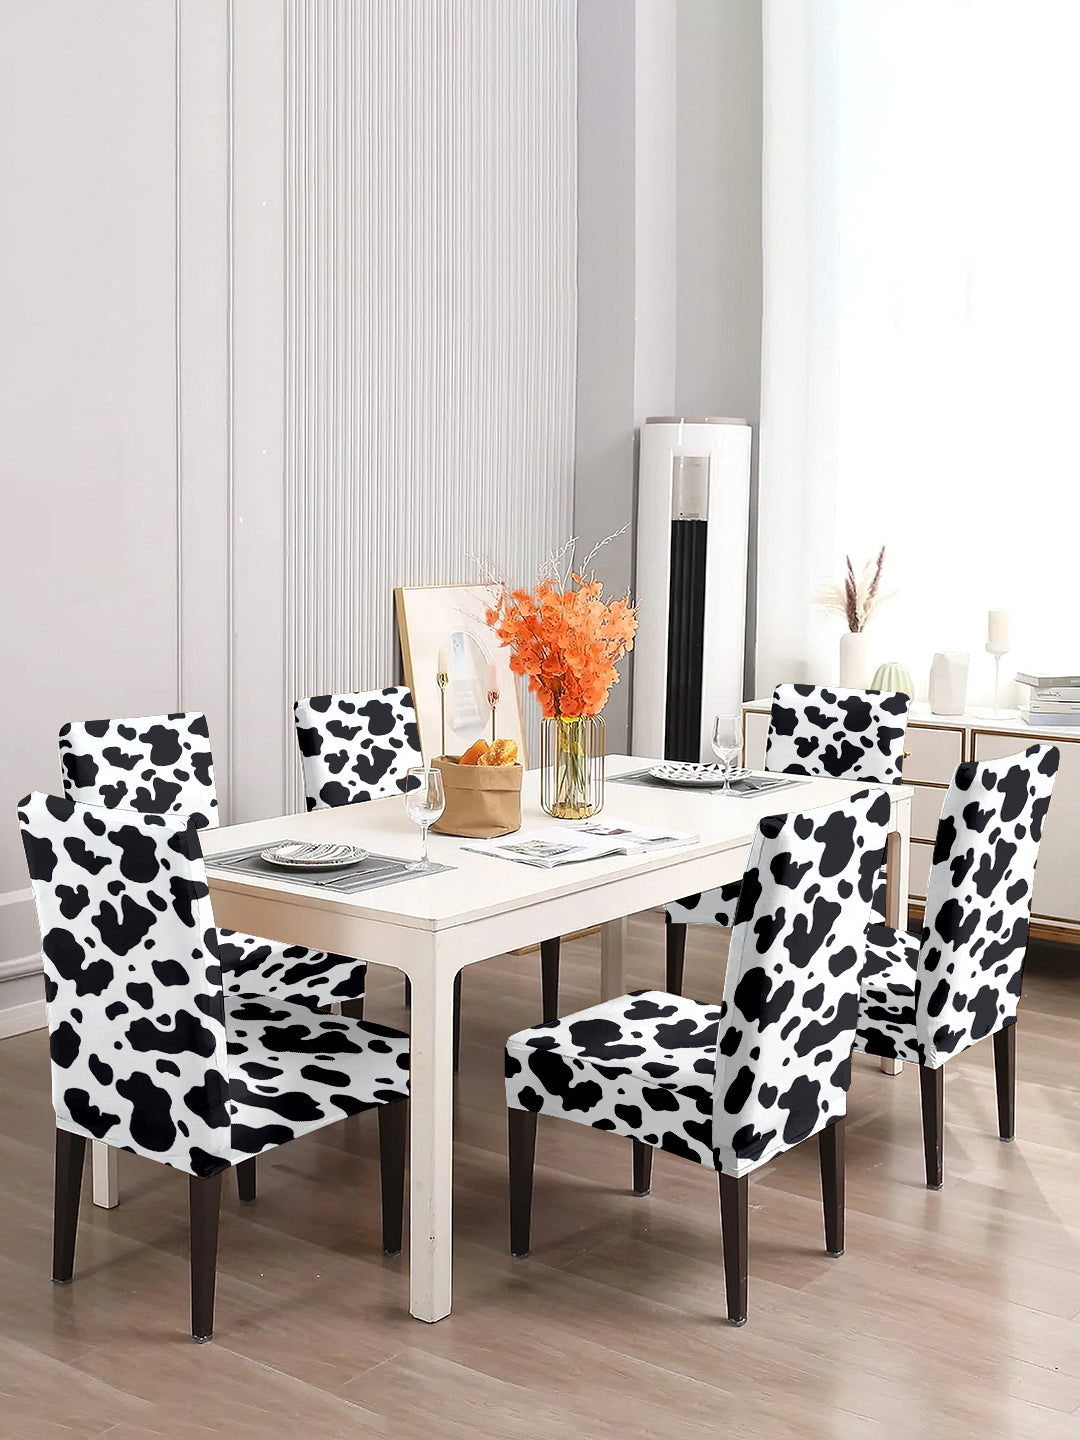 Elastic Geometric Printed Non-Slip Dining Chair Covers Set of 6 - White